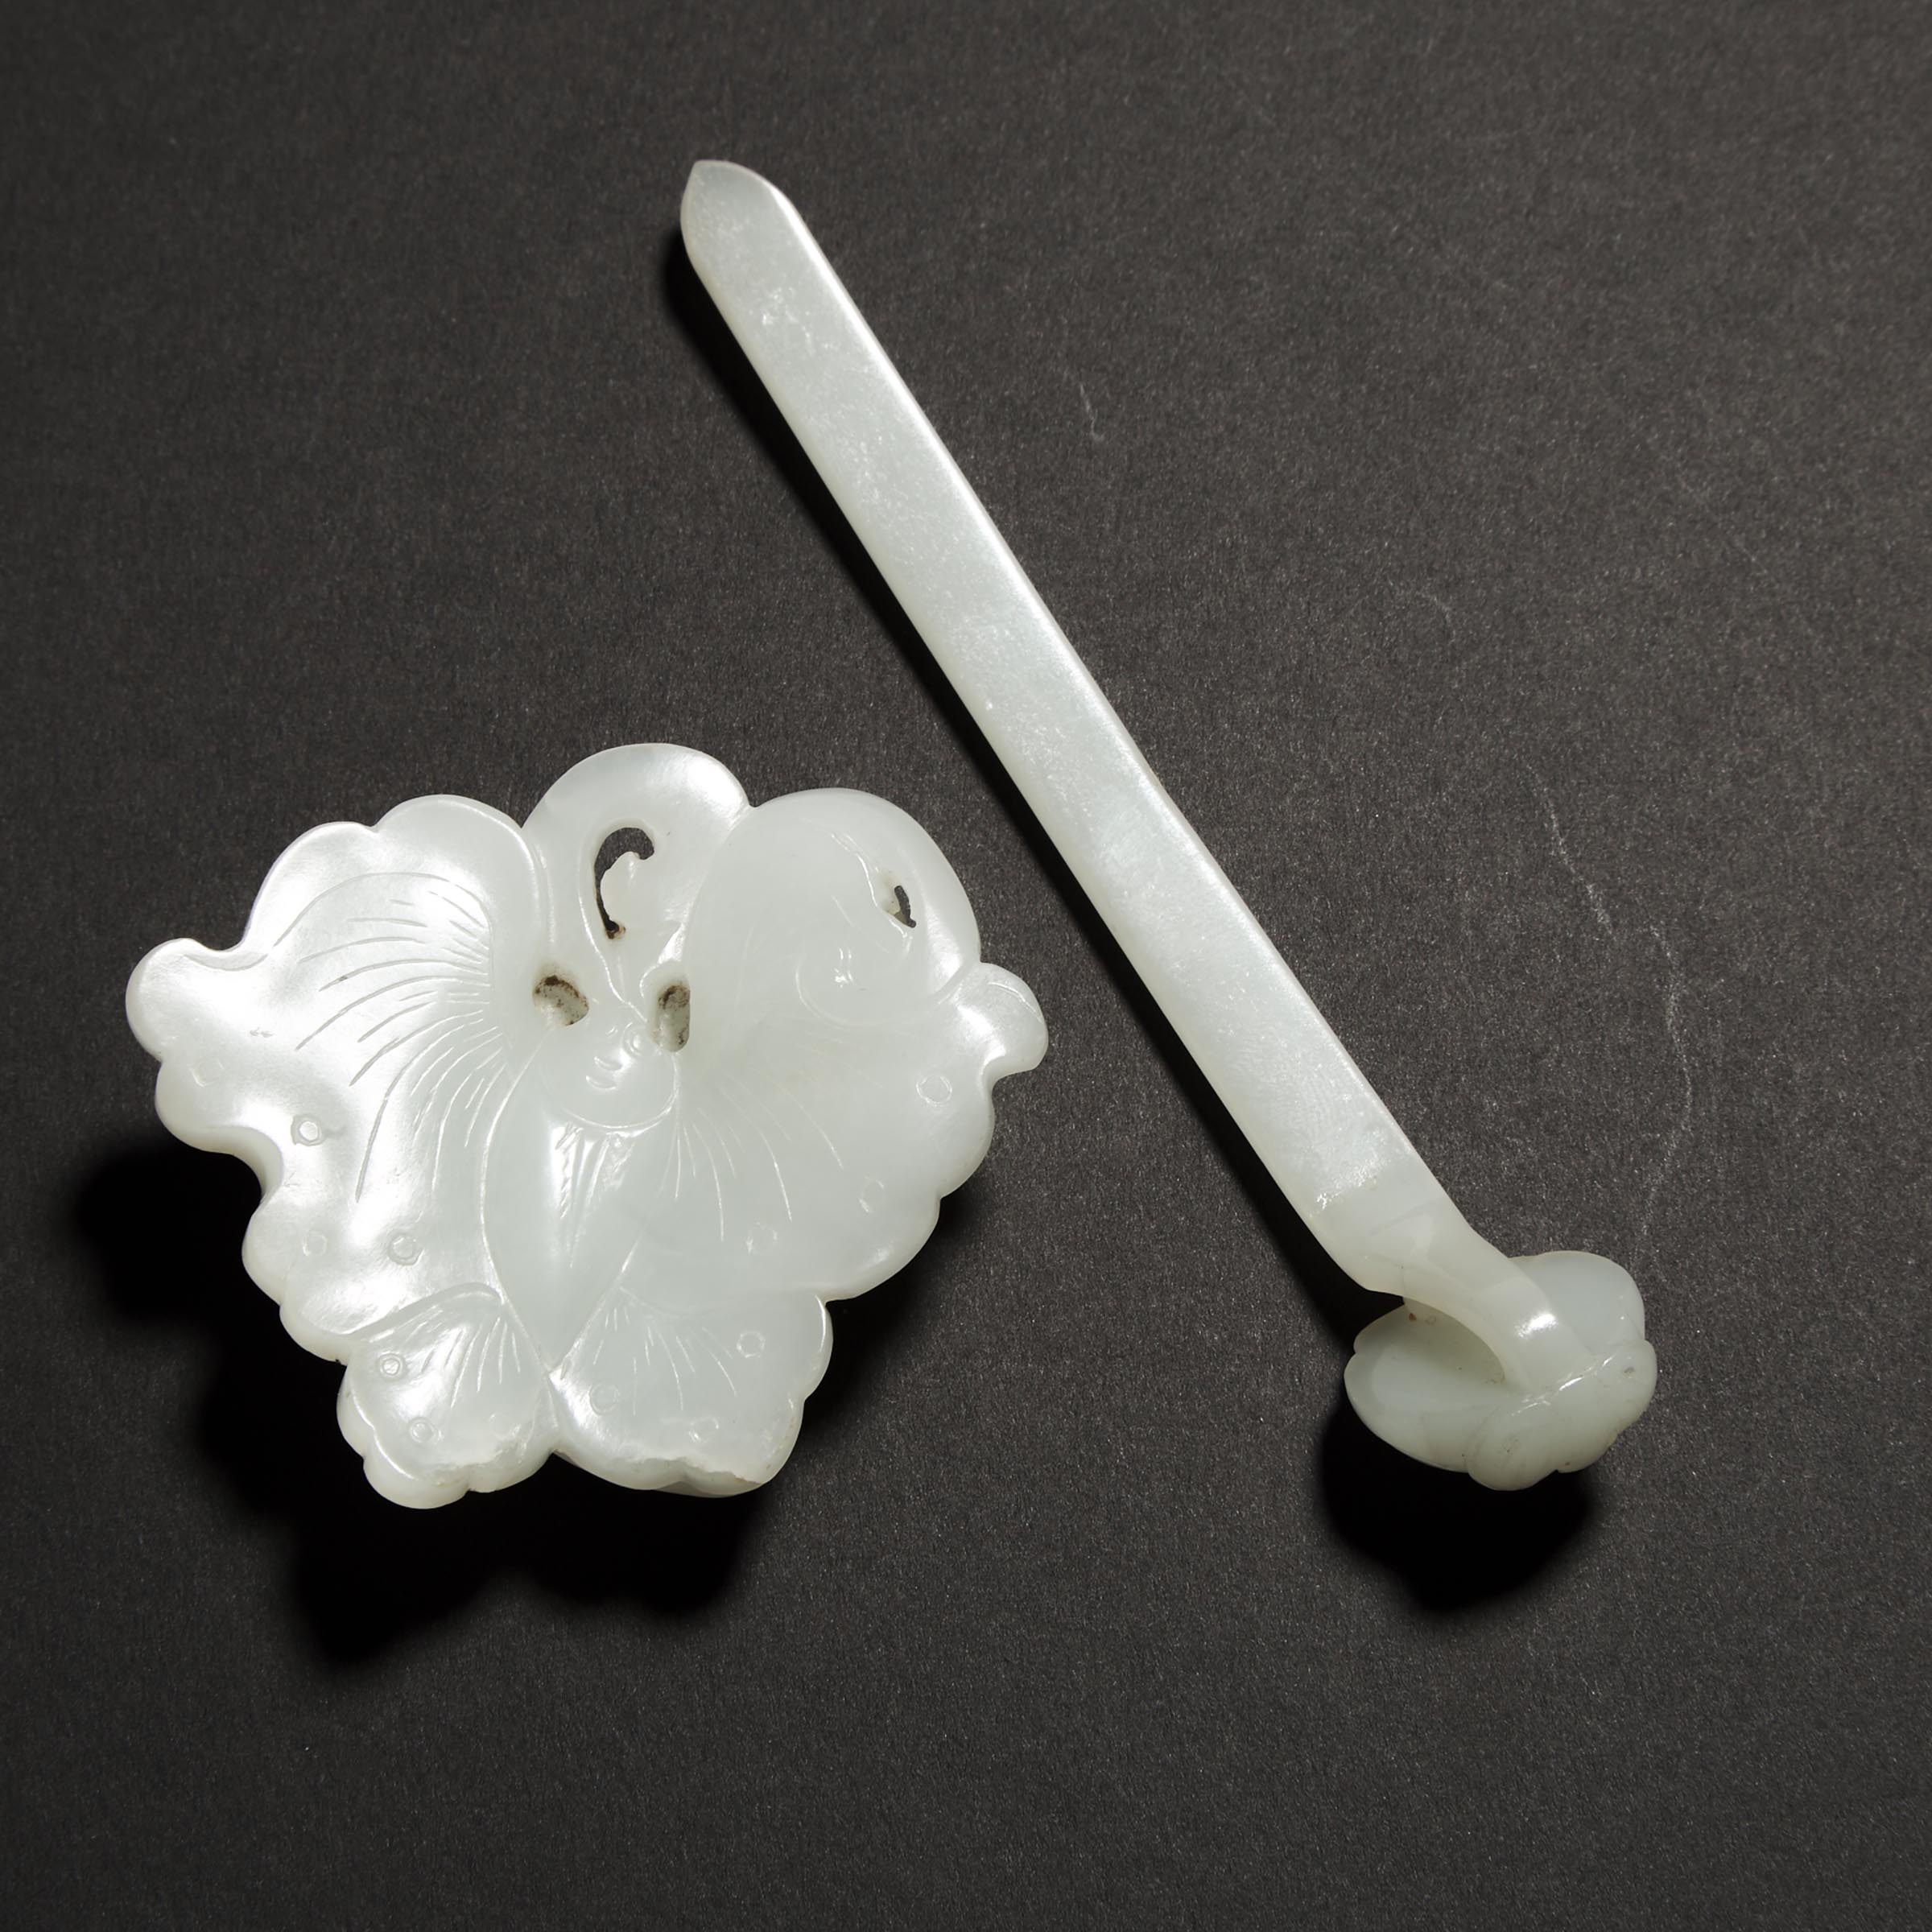 A White Jade Double-Butterfly Carving, together with a White Jade Hair Pin, Late Qing Dynasty